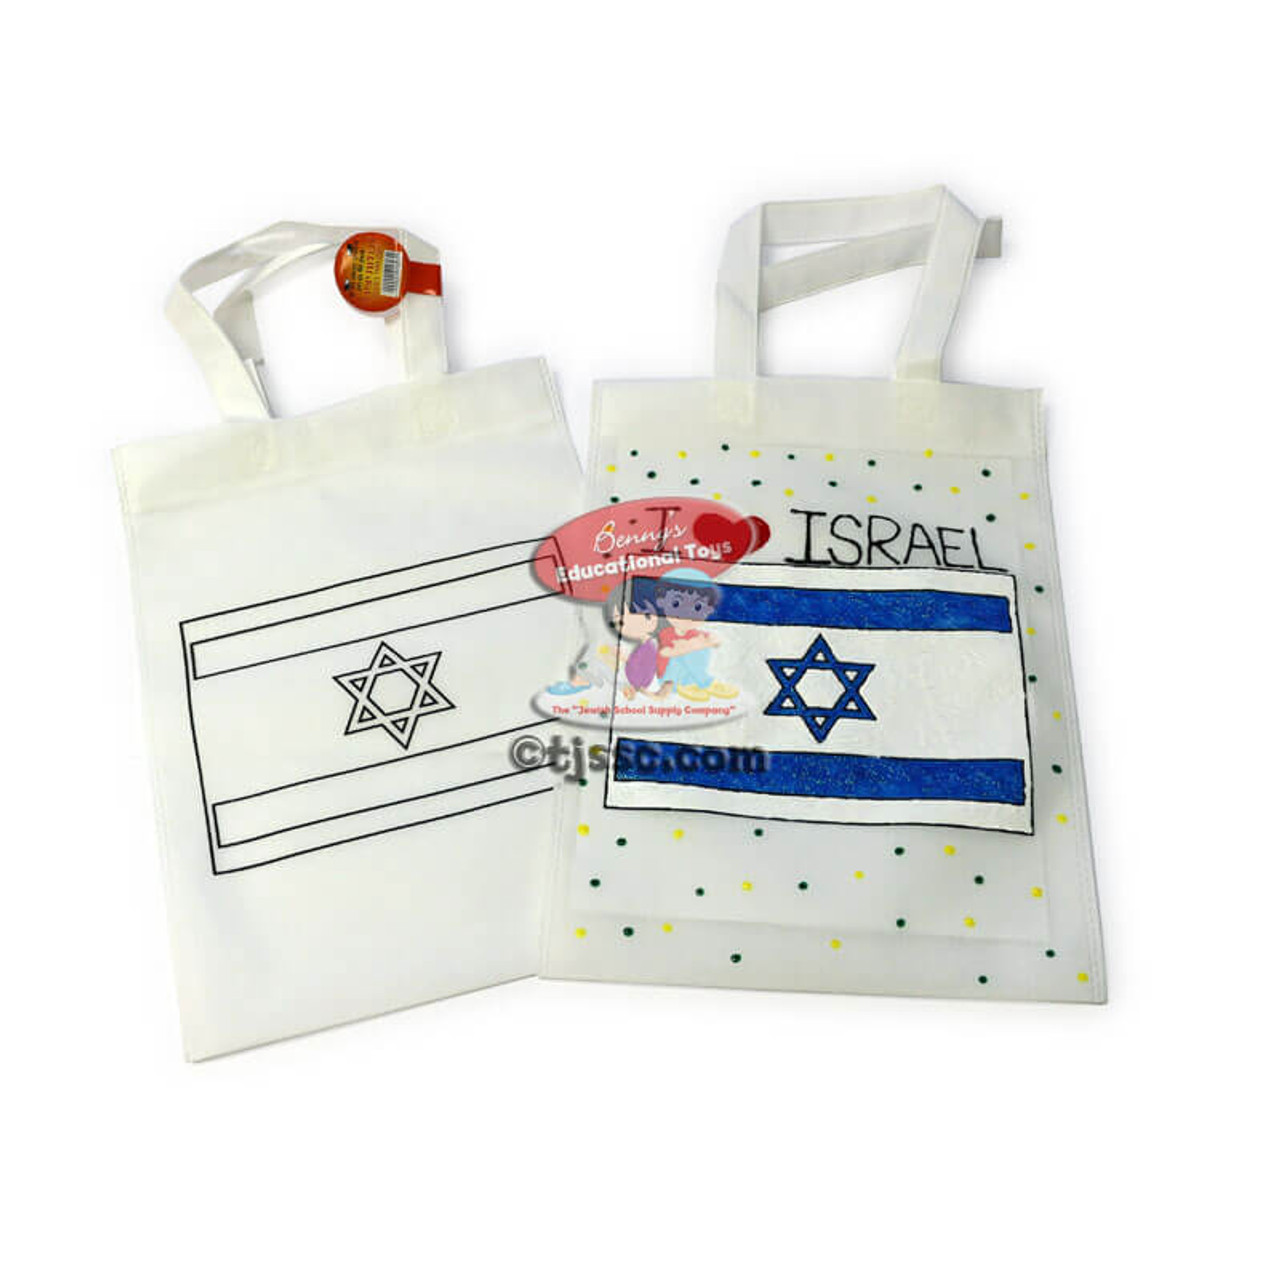 Fruits & Produce of Israel, 7 Species Israel, Fruit, Tote Bag, Cotton Bag,  Israel, Everyday Bag, Shopping Bag, Jewish Gift, Gift for Her - Etsy